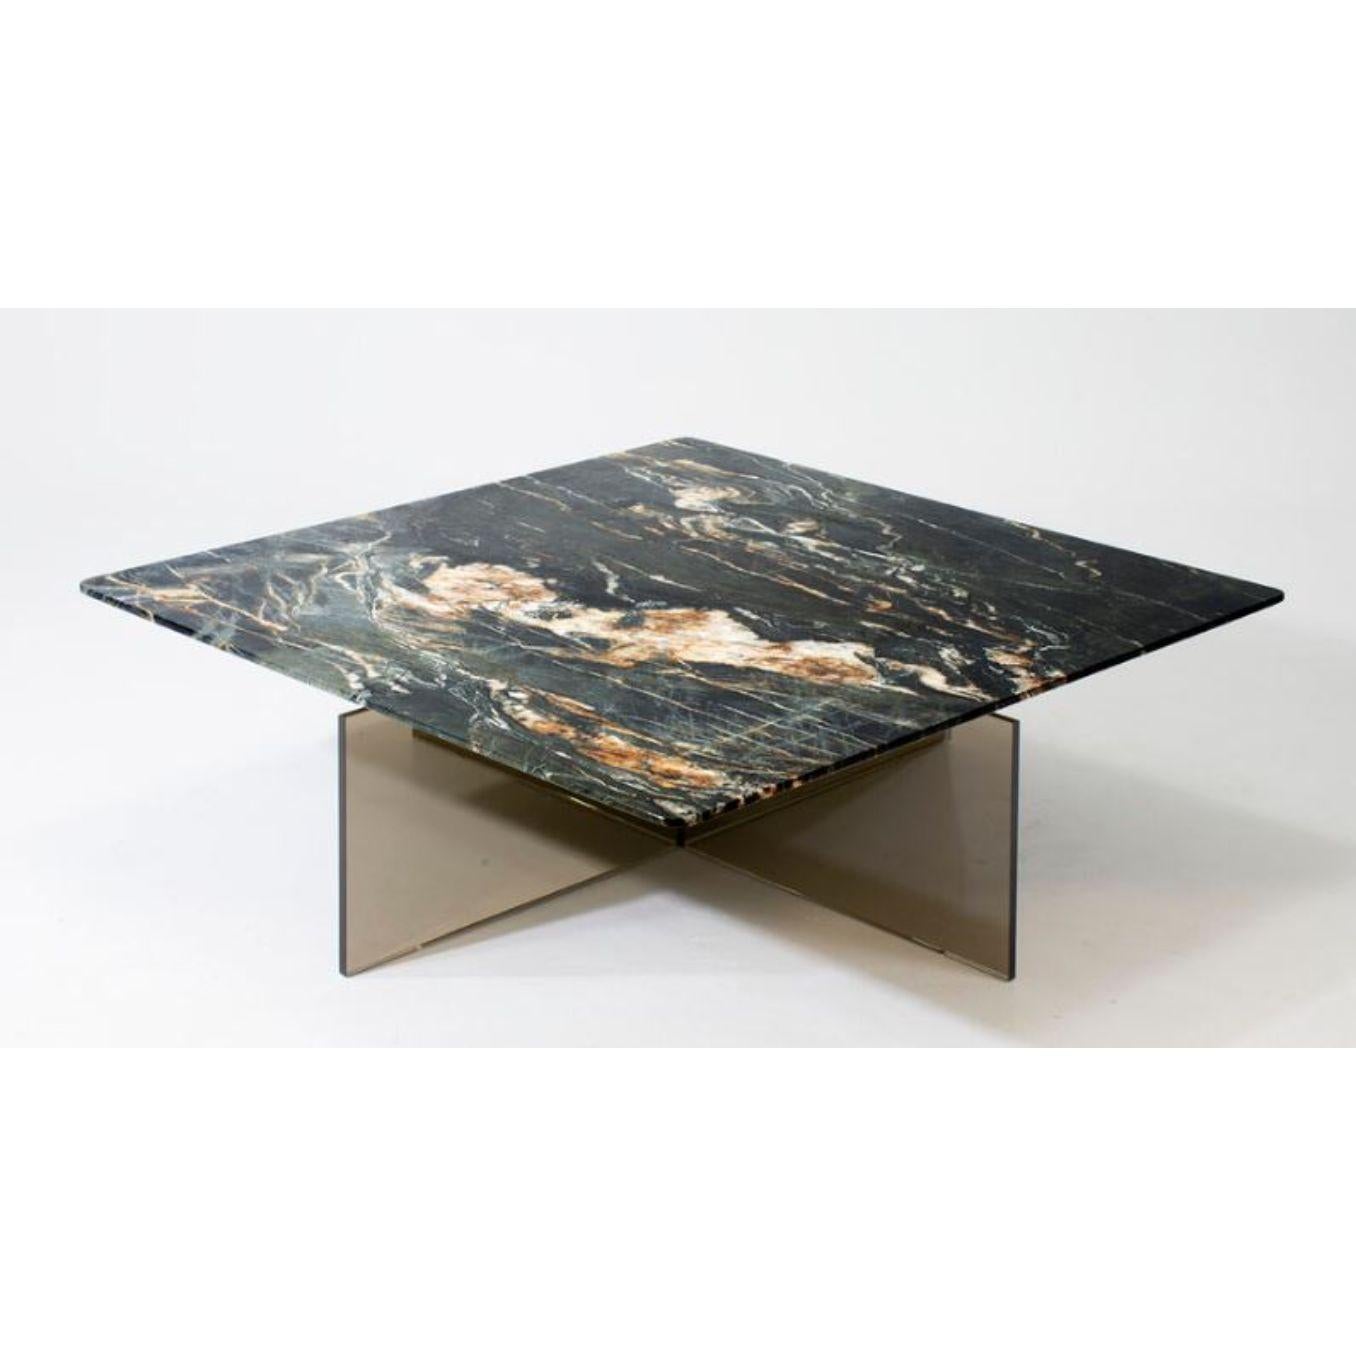 Belvedere Black Beside Myself Square Coffee Table by Claste
Dimensions: D 106.7 x W 106.7 x H 35.6 cm
Material: Marble, glass
Weight: 145 kg

Since 2017 Quinlan Osborne has cultivated an aesthetic in his work that is rooted in the passion for